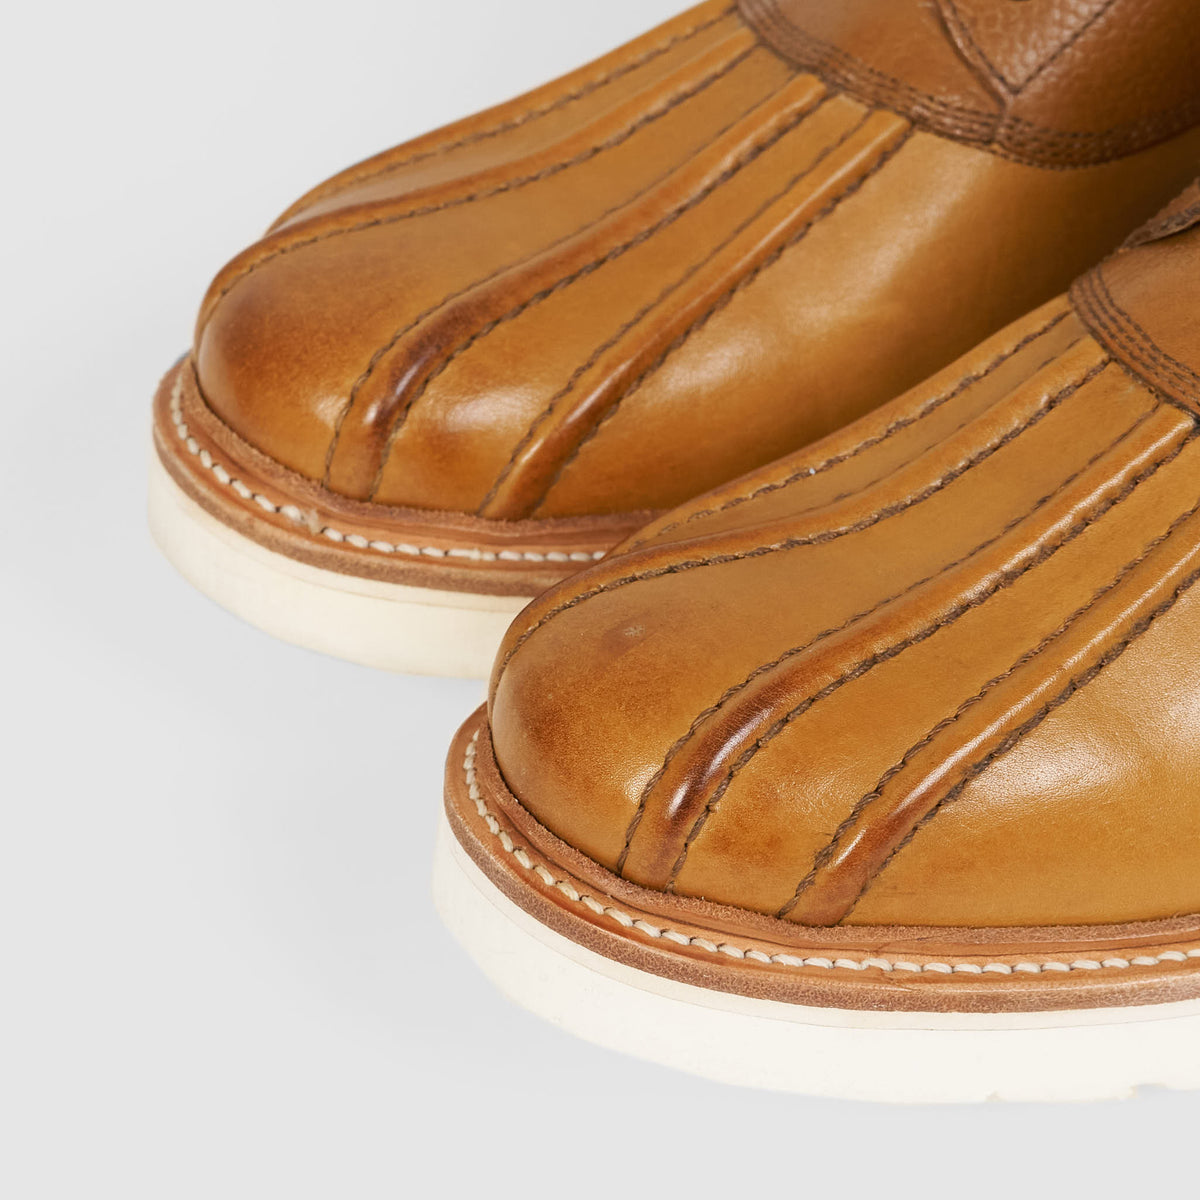 Grenson Leather Duck Boots